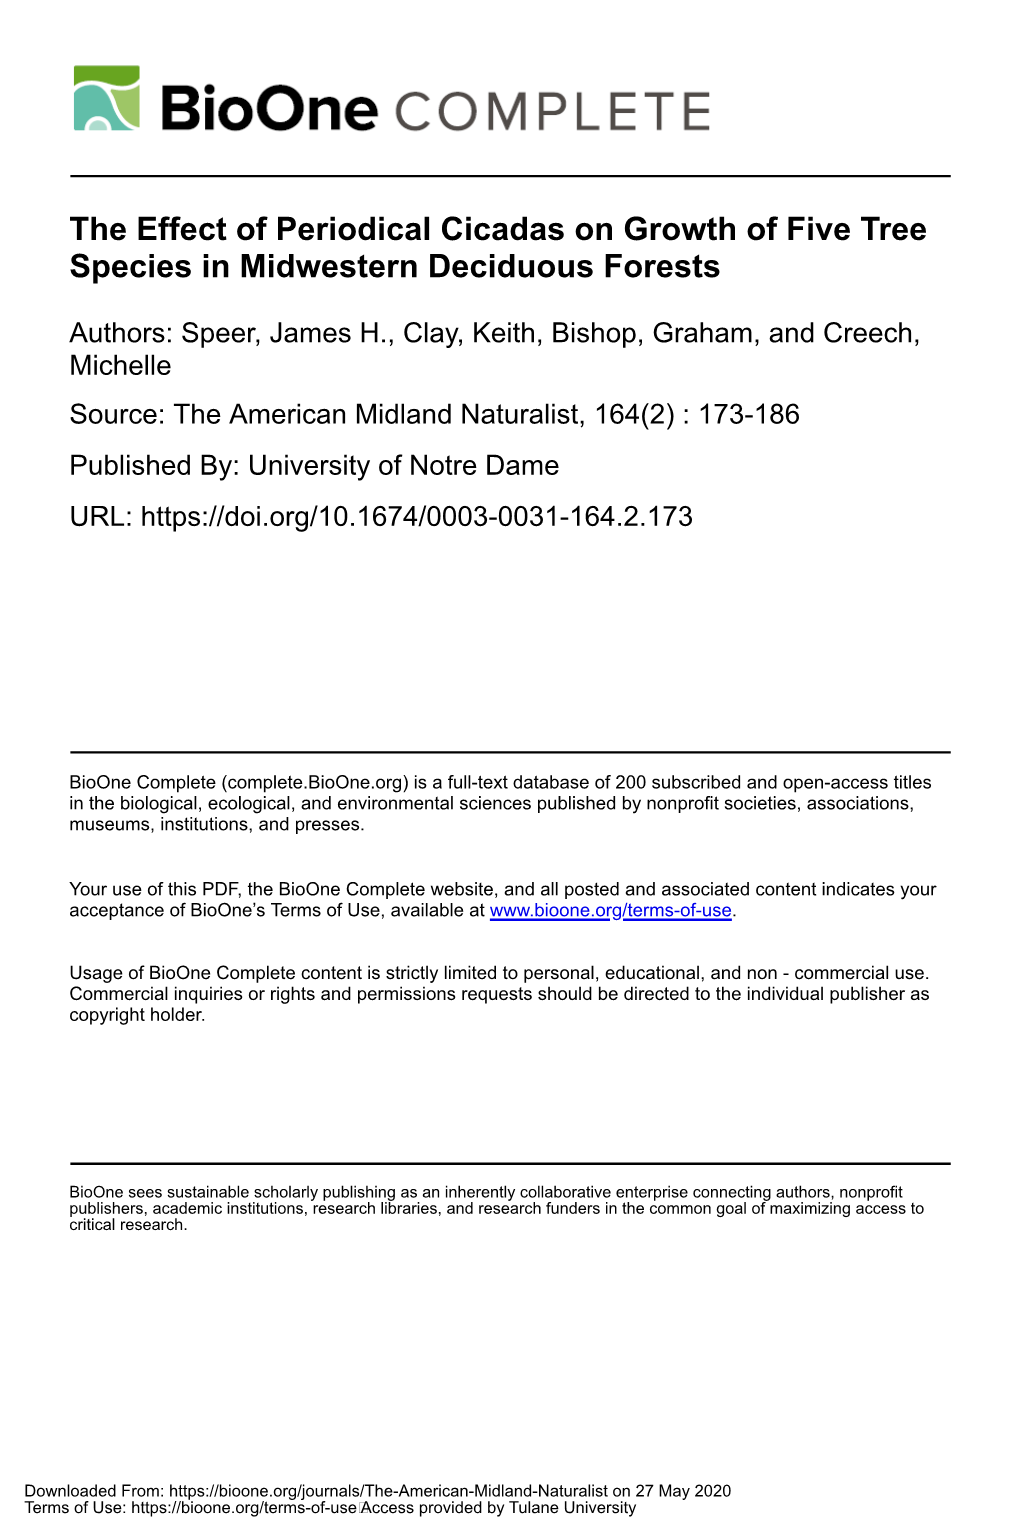 The Effect of Periodical Cicadas on Growth of Five Tree Species in Midwestern Deciduous Forests